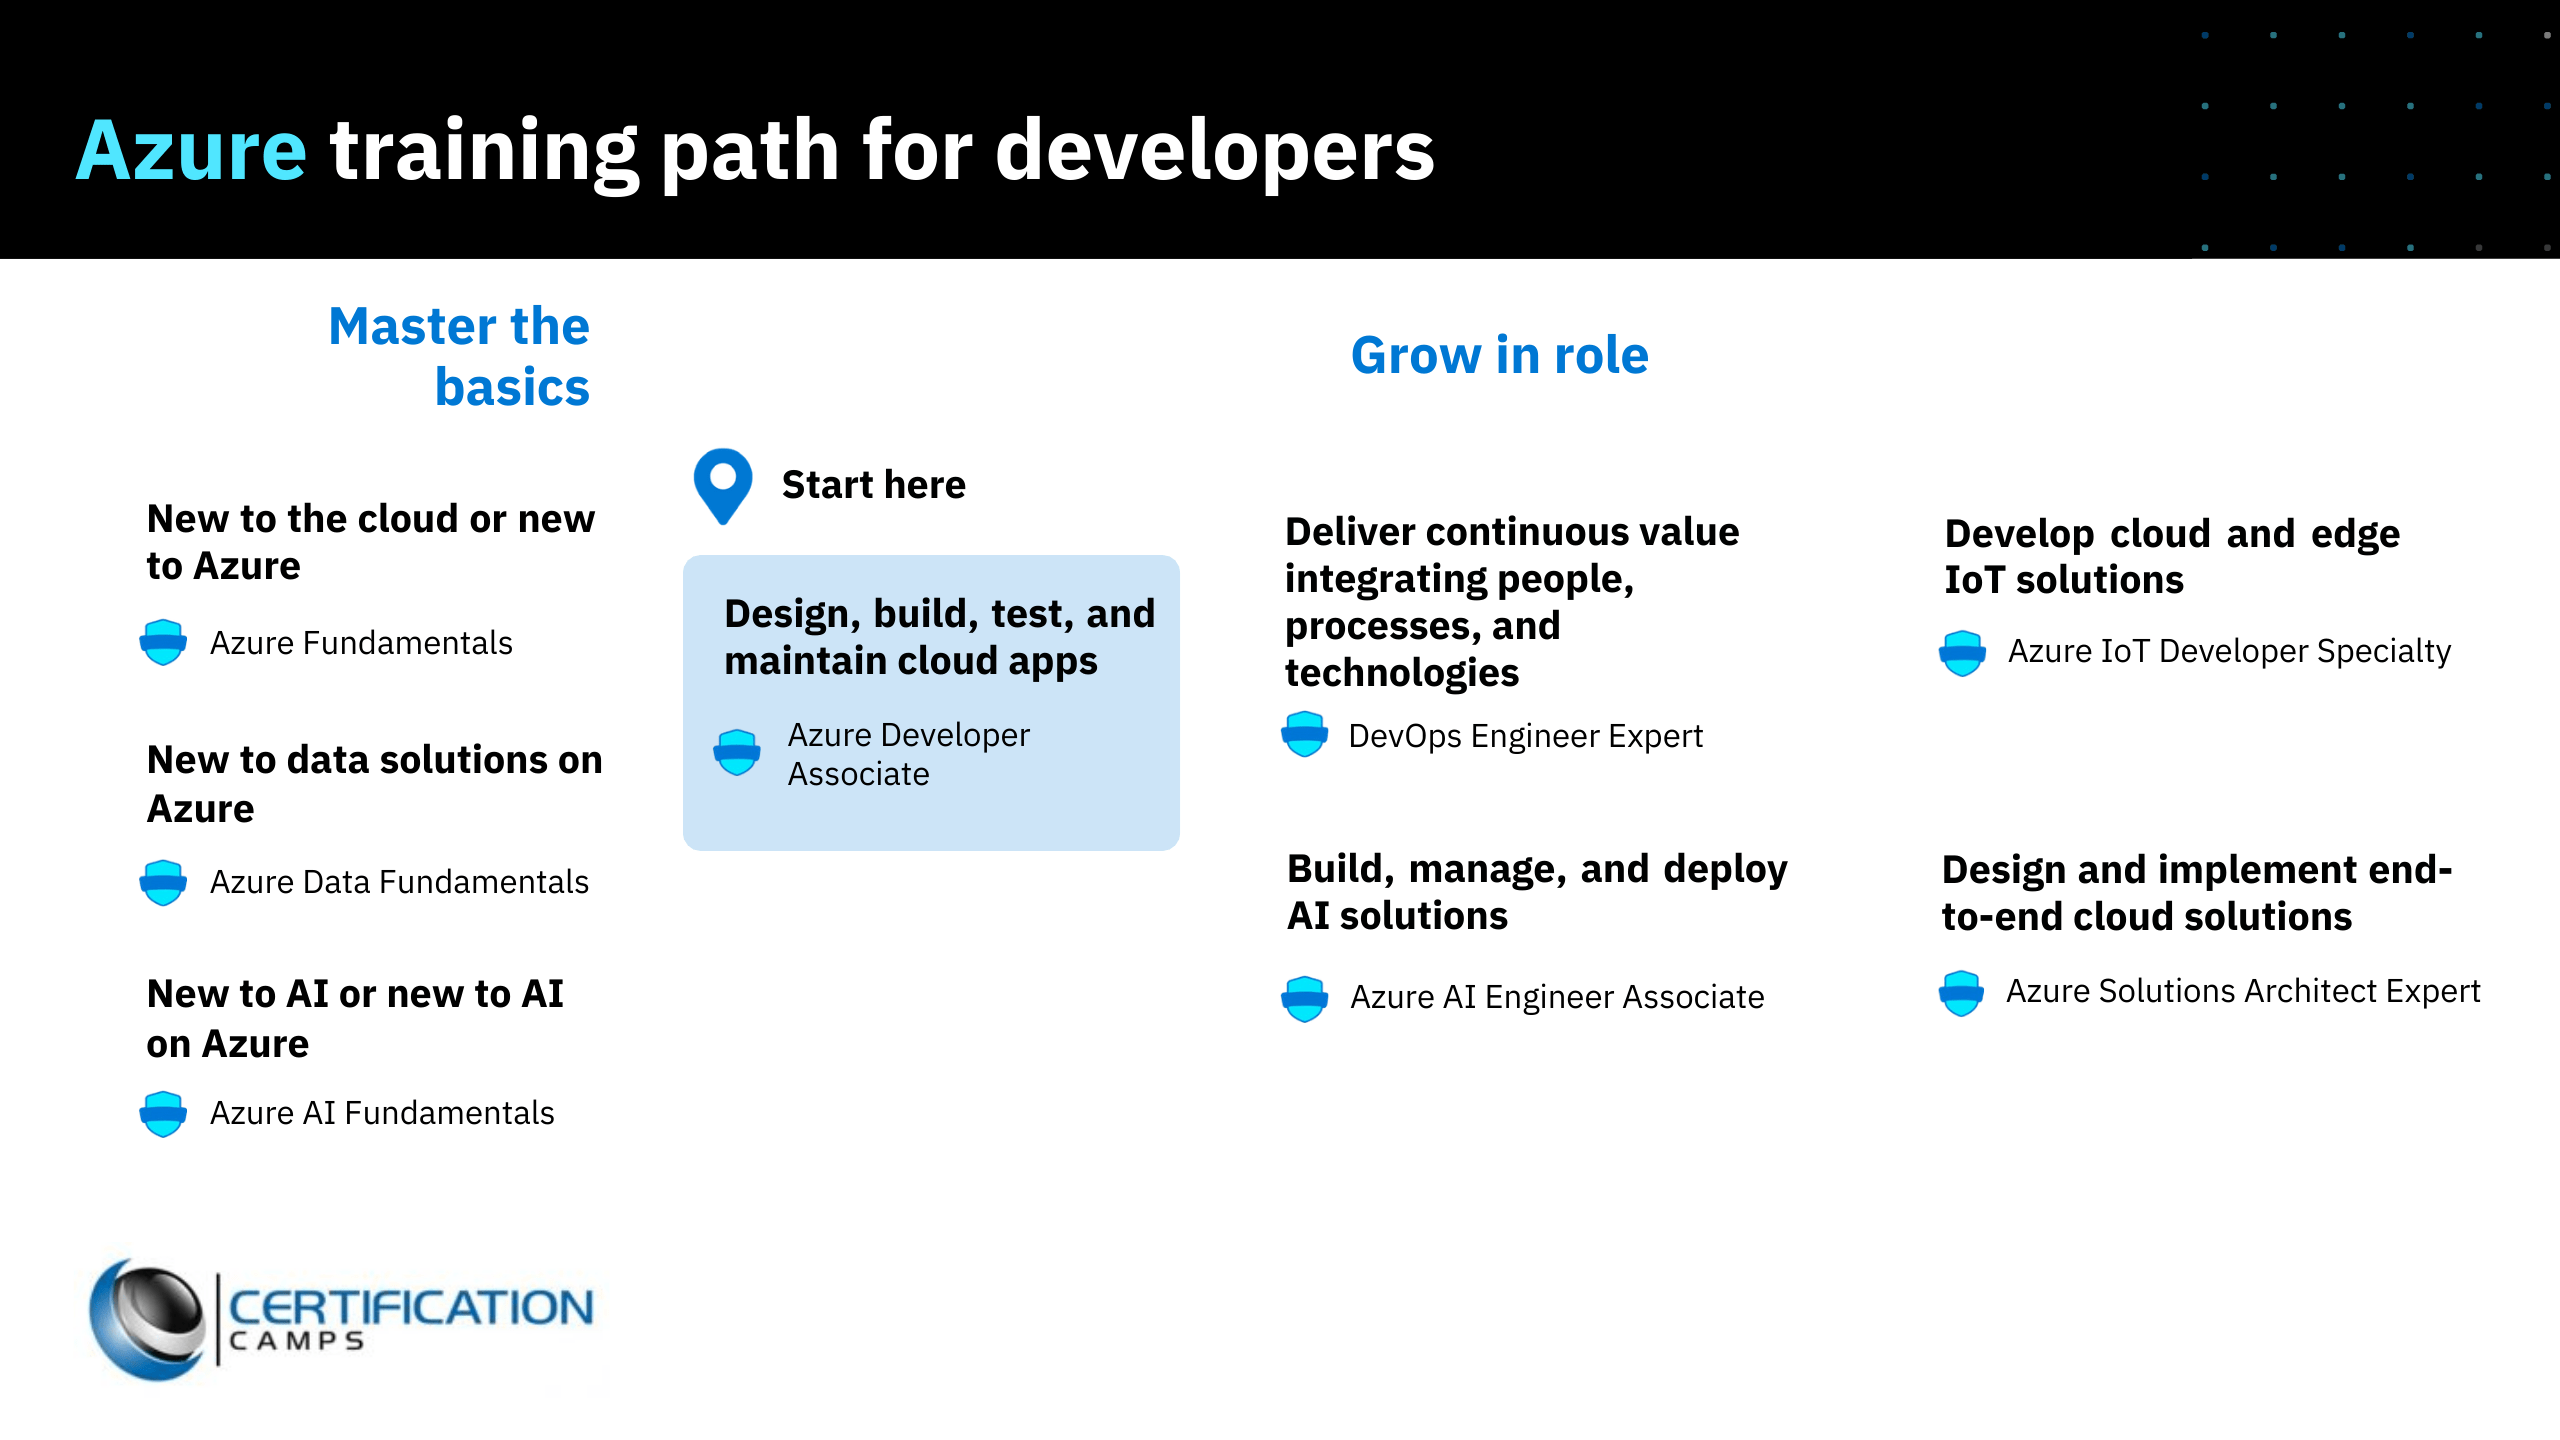 Azure Certification Path for IT Pros